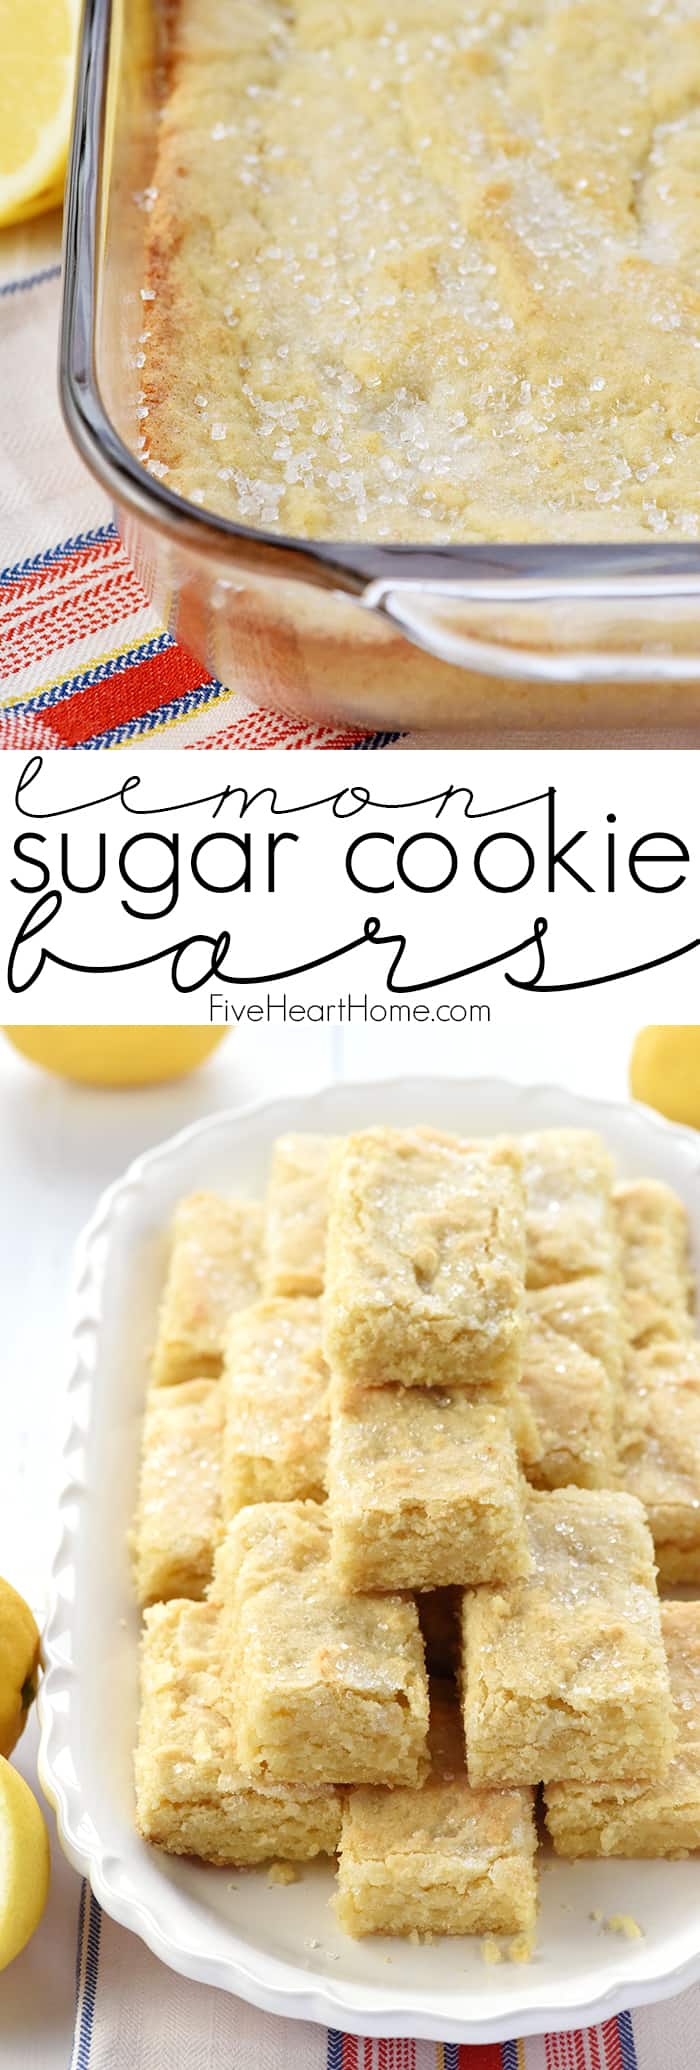 Lemon Sugar Cookie Bars ~ flavored with lemon zest and topped with crunchy sparkling sugar for a sunny, yummy, easy-to-make treat! | FiveHeartHome.com via @fivehearthome